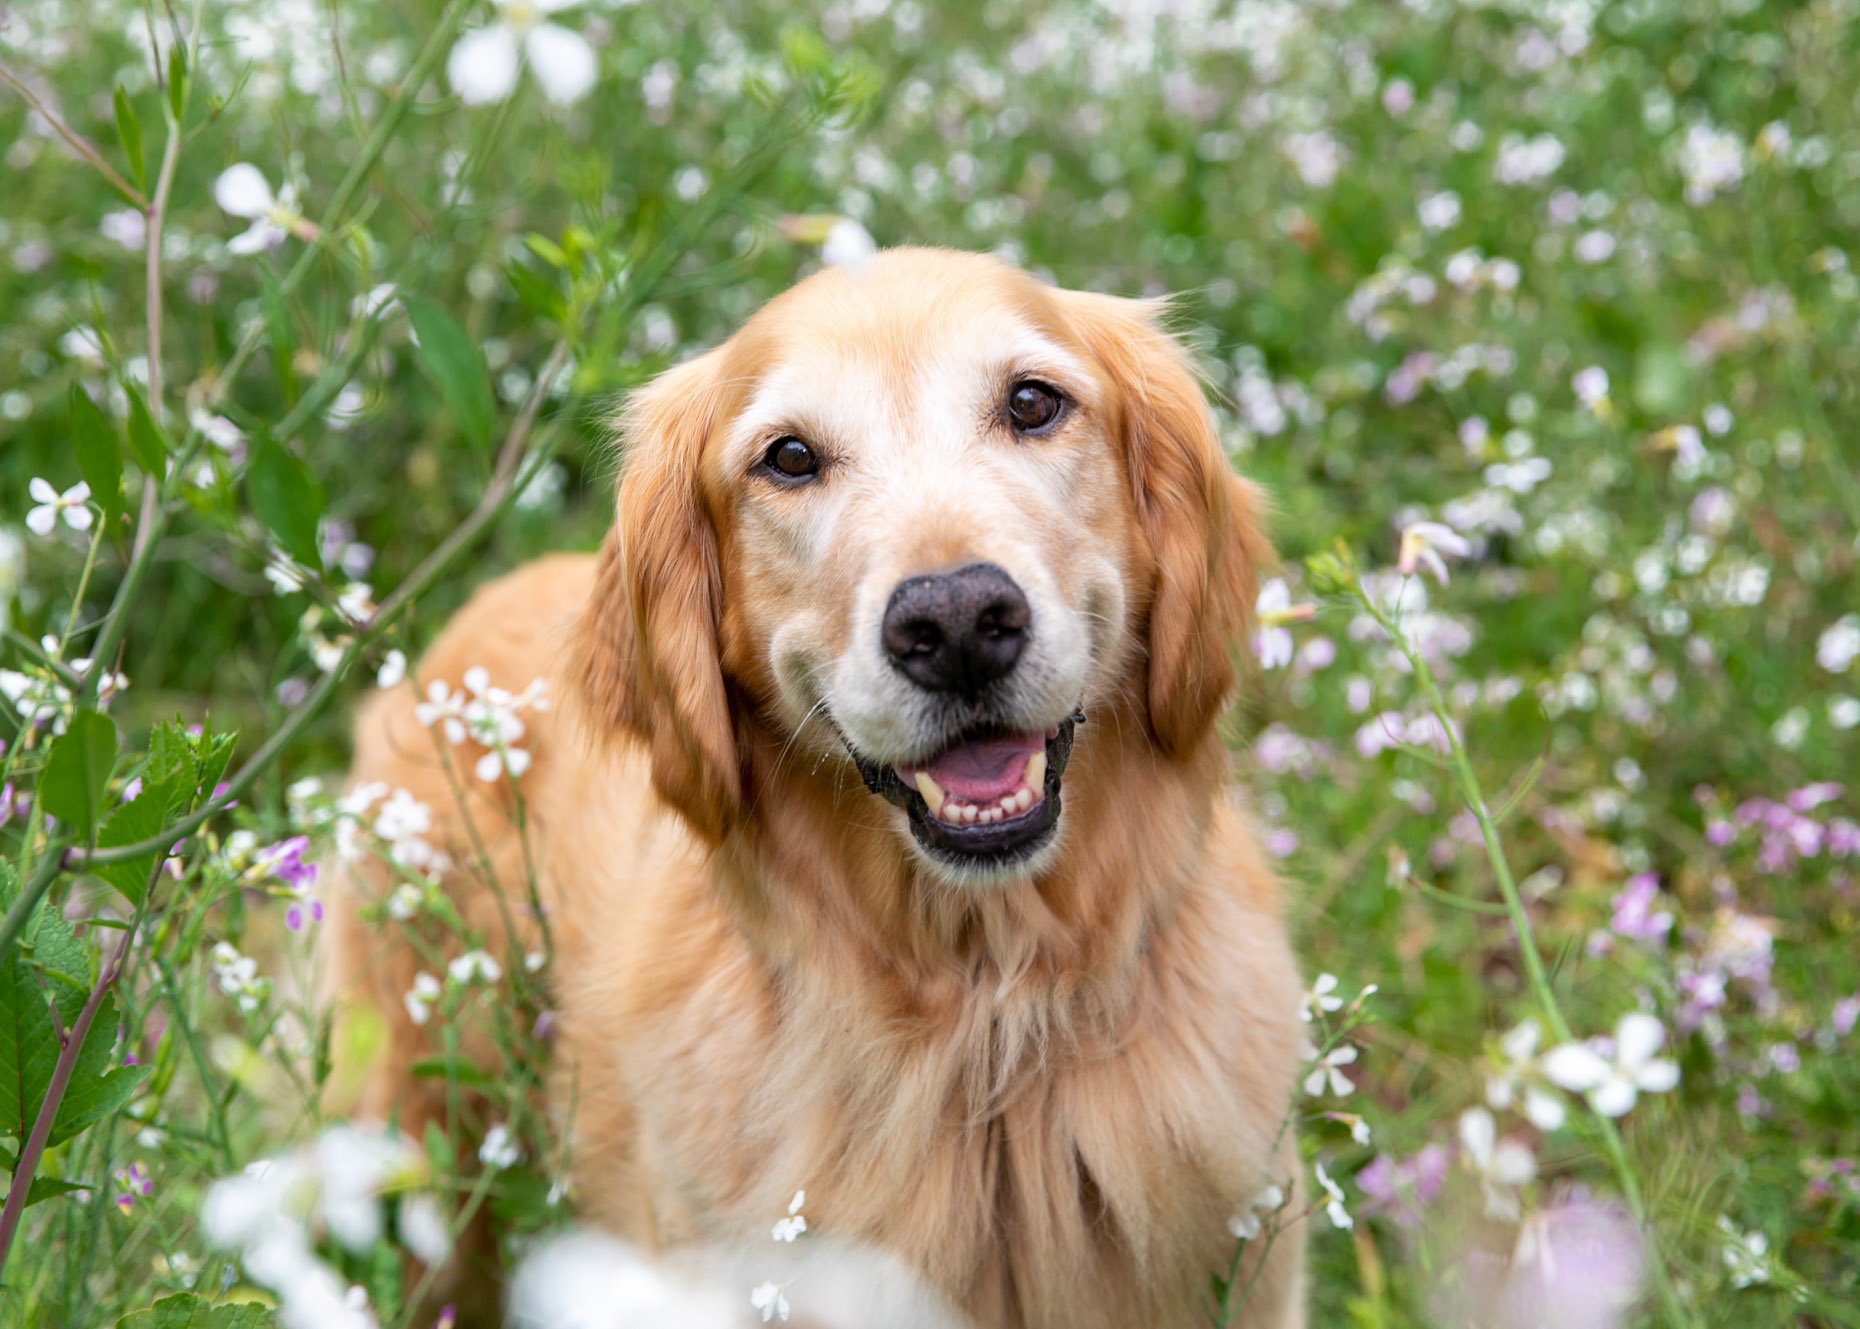 Dog and Pet Photography | Retriever in Wildflowers by Mark Rogers